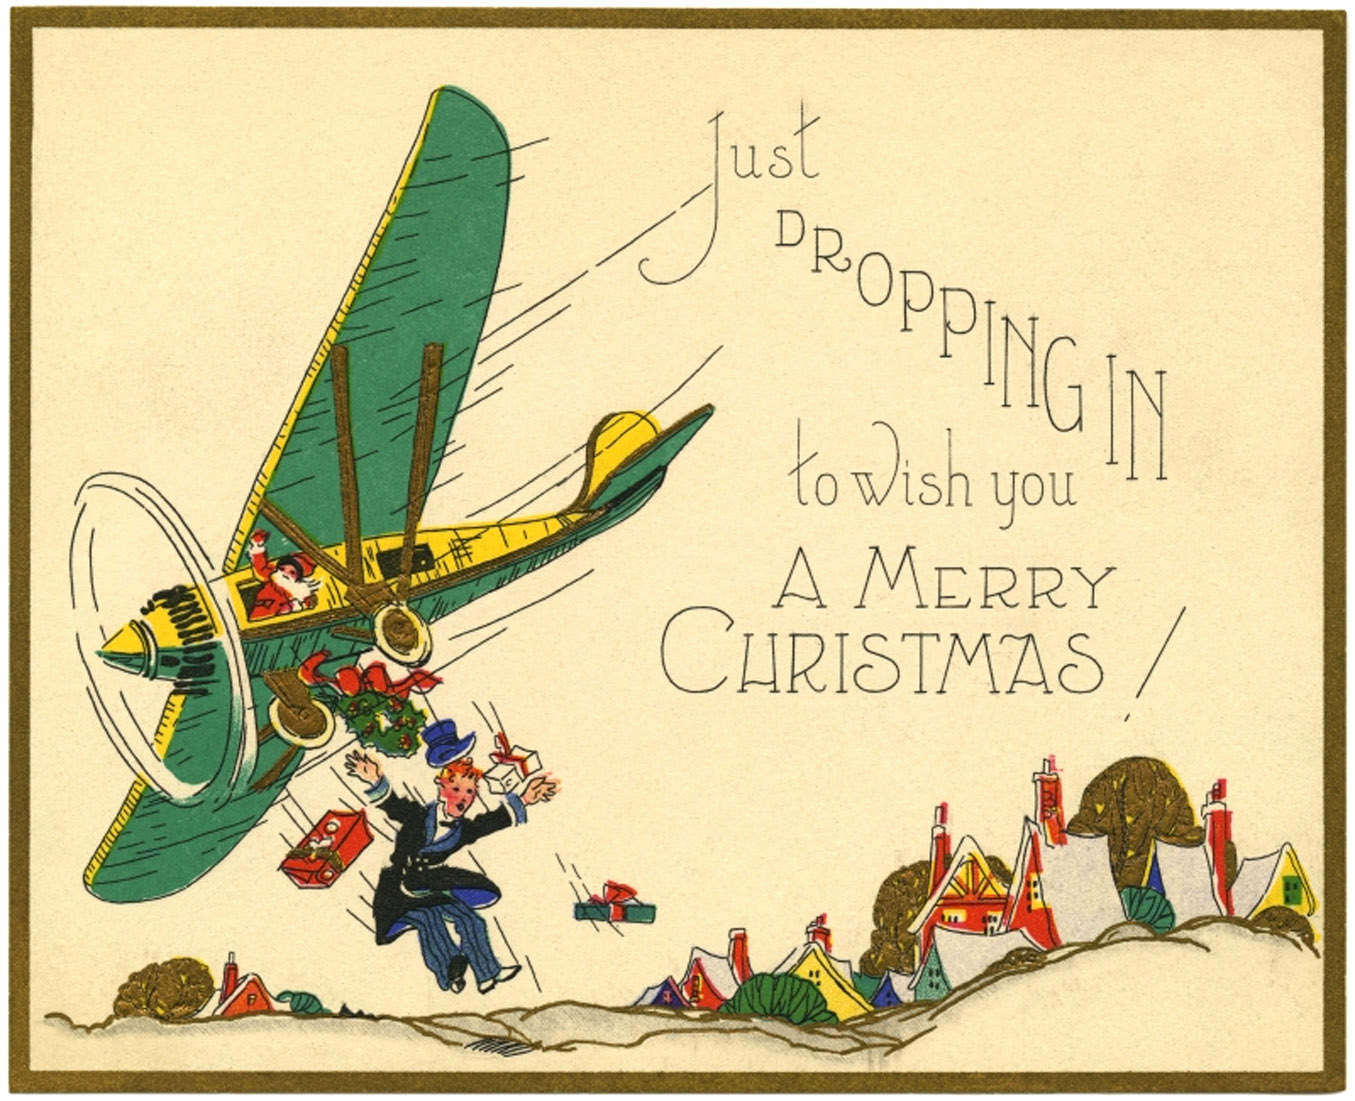 Man just dropping in ... from airplane - funny vintage Christmas card